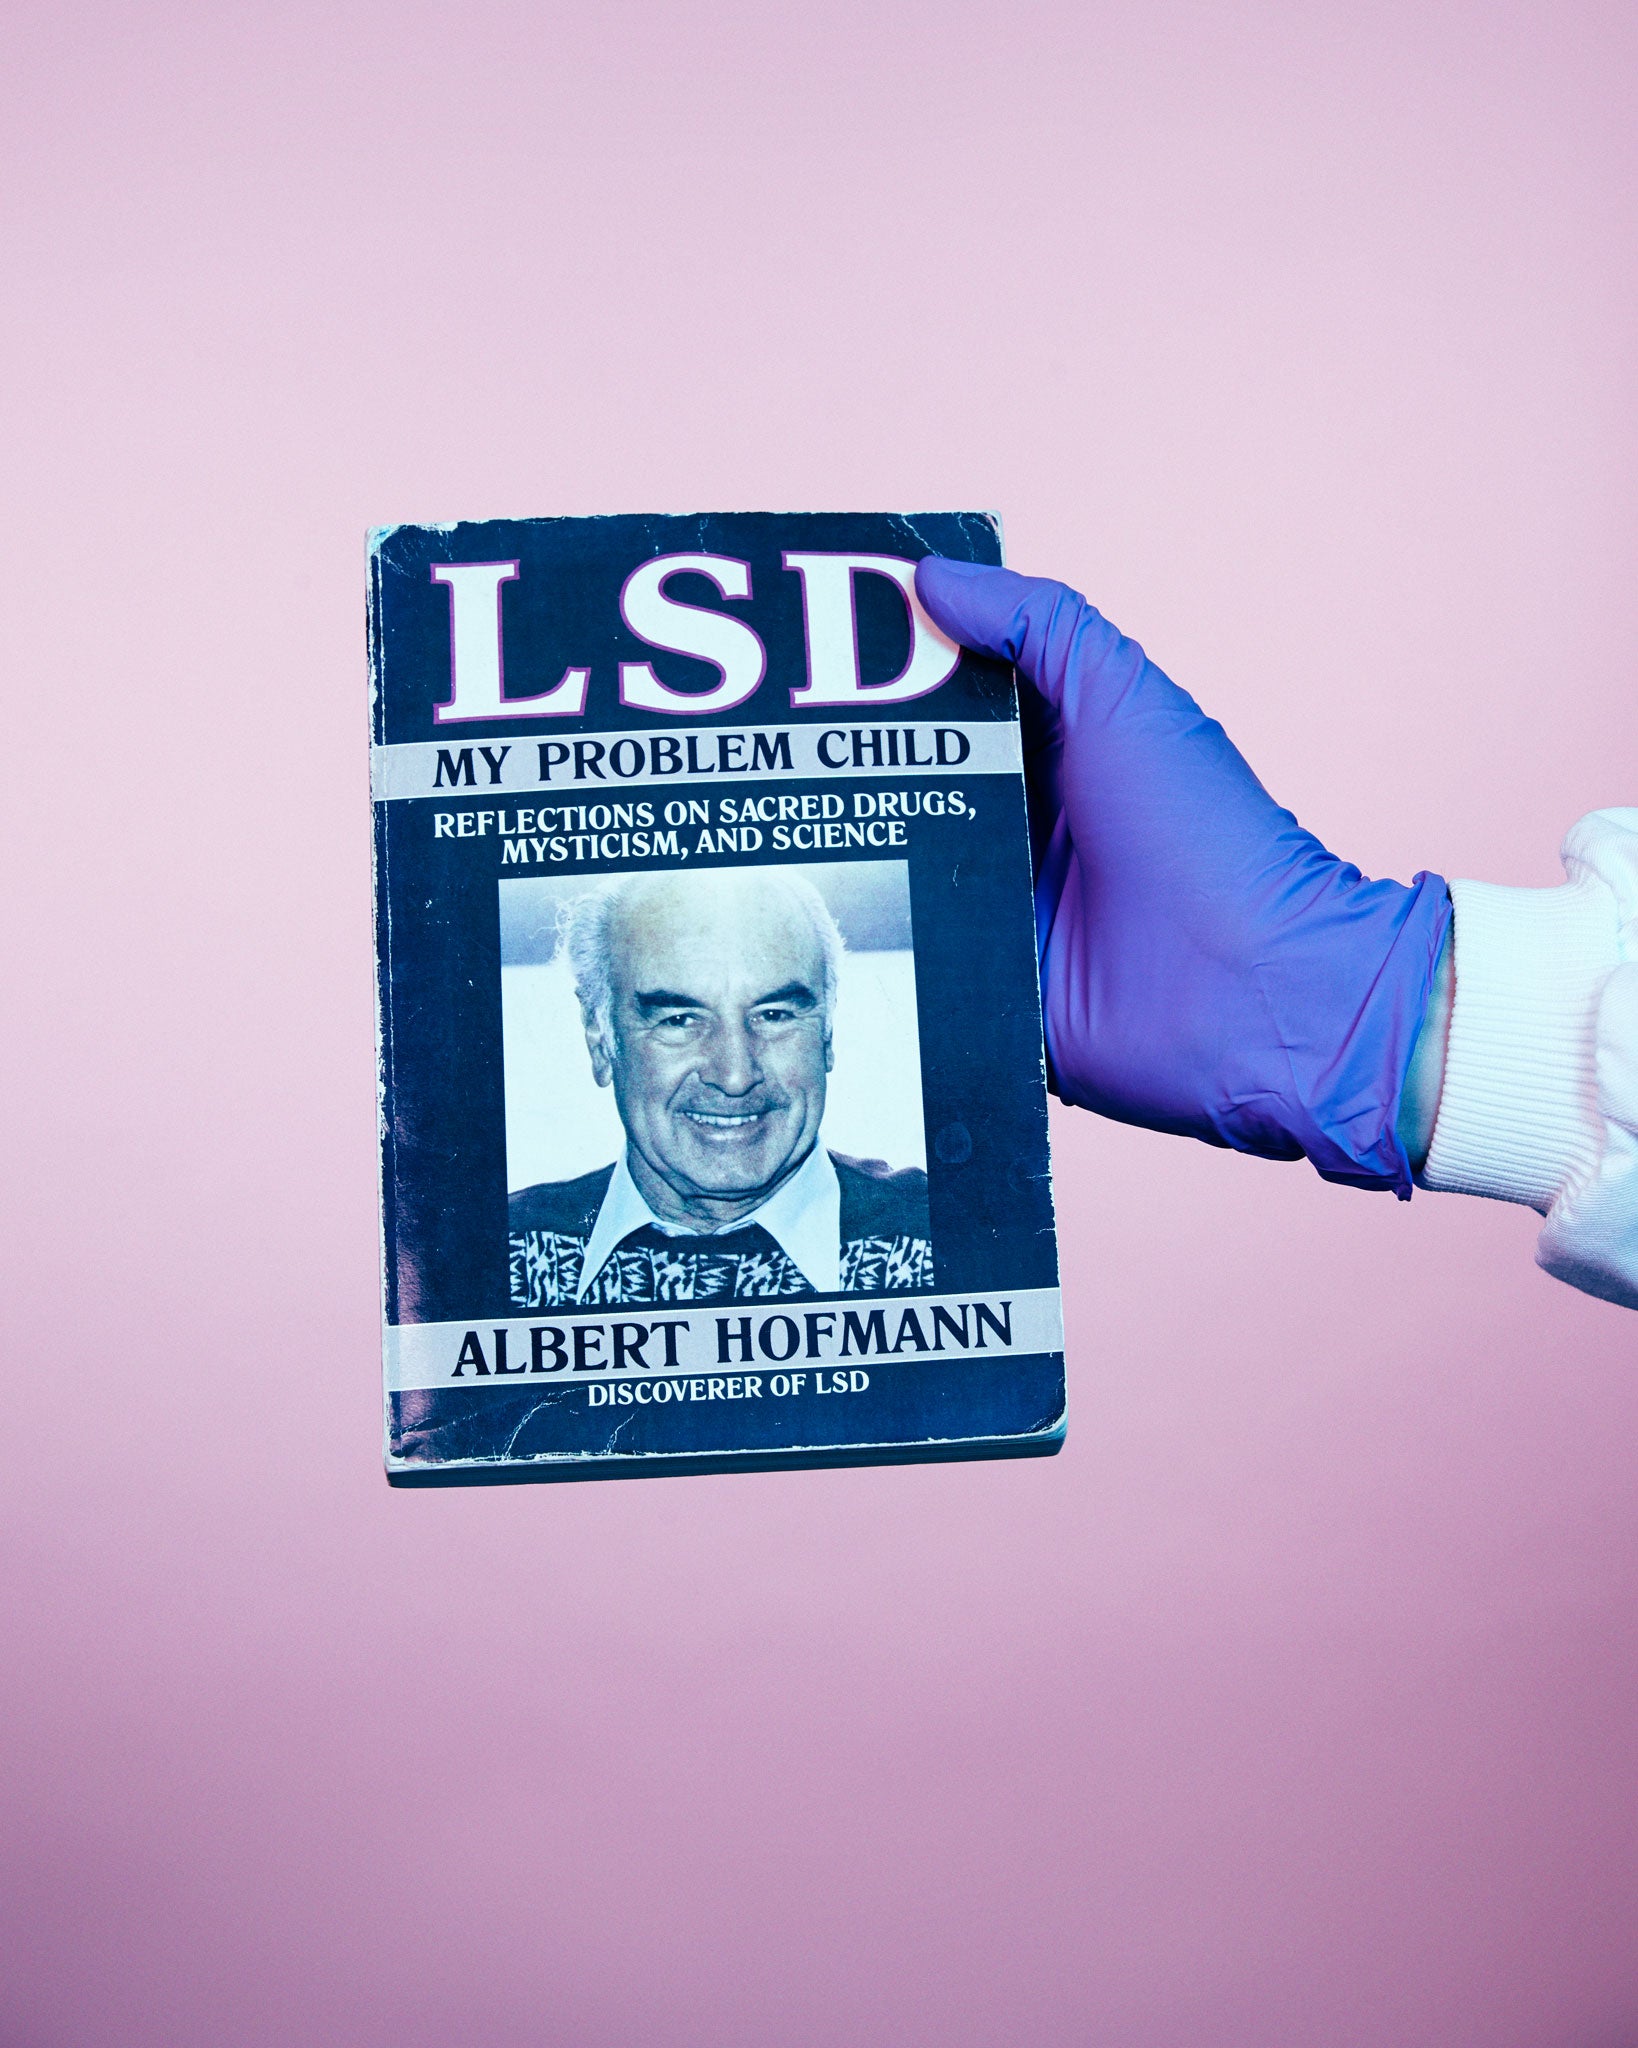 Albert Hofmann's 1980 book traces LSD’s path from a promising research medicine to a recreational drug that sparked hysteria